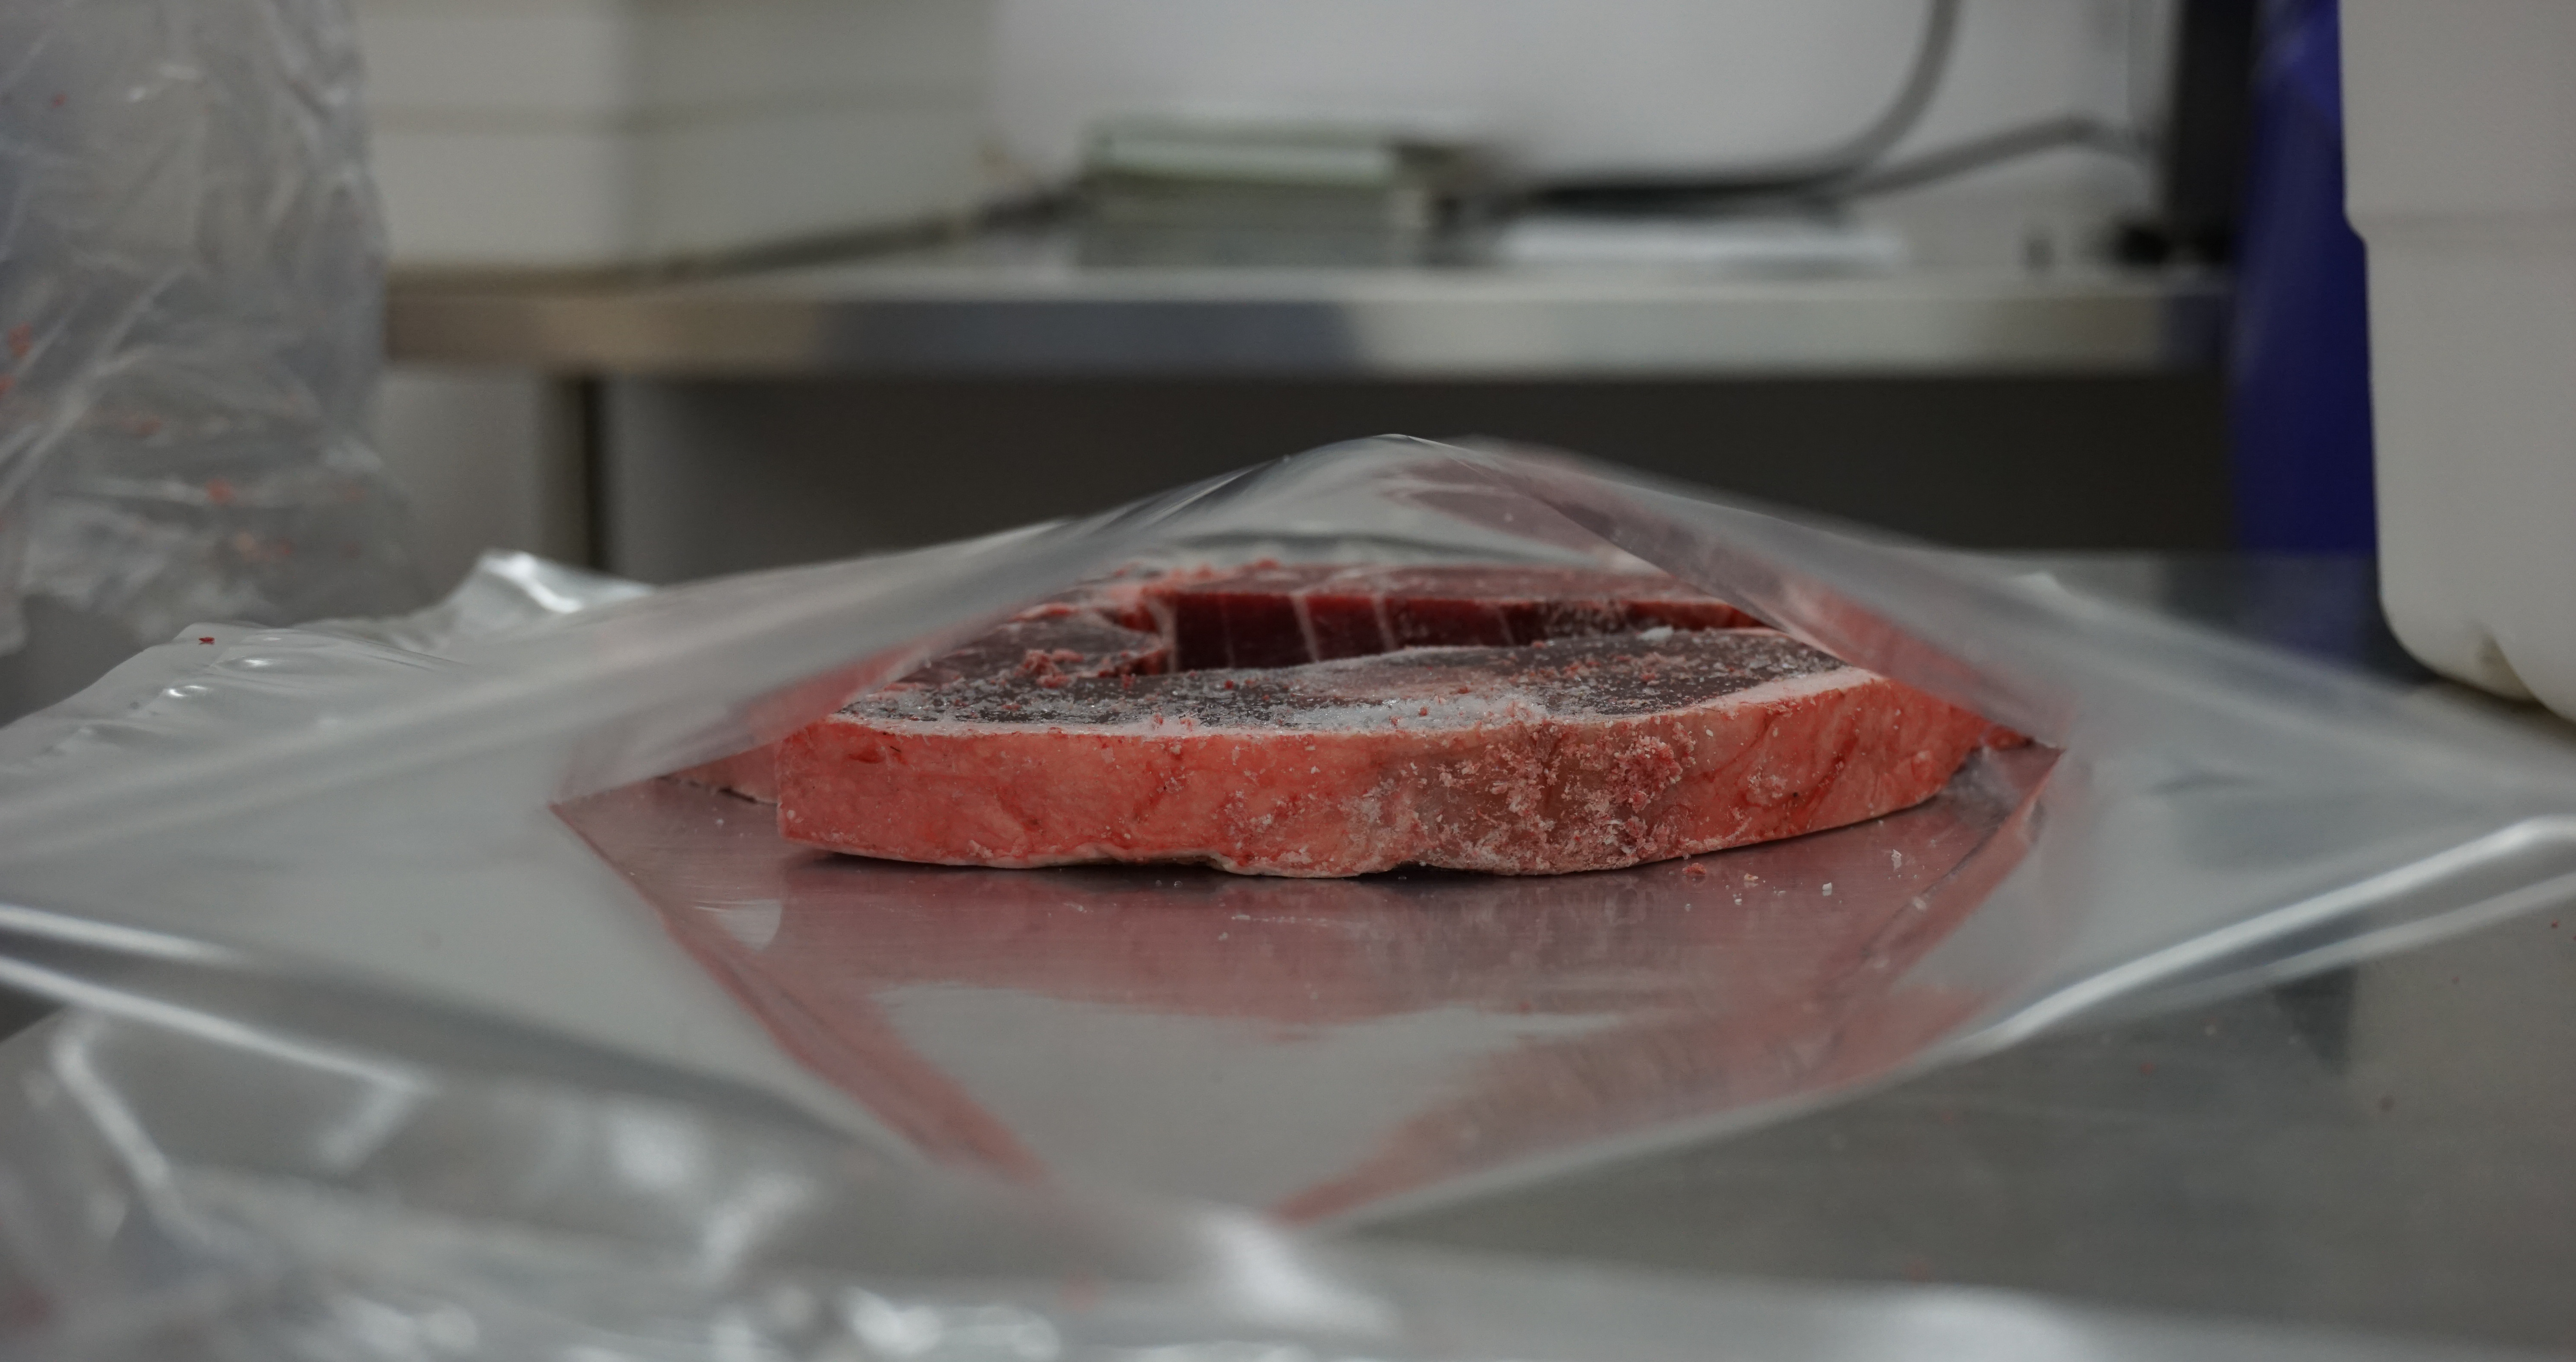 Caribou T-bone steak ready to be packaged for the long-term care facility. (Photo by Anne Hillman/Alaska Public Media)